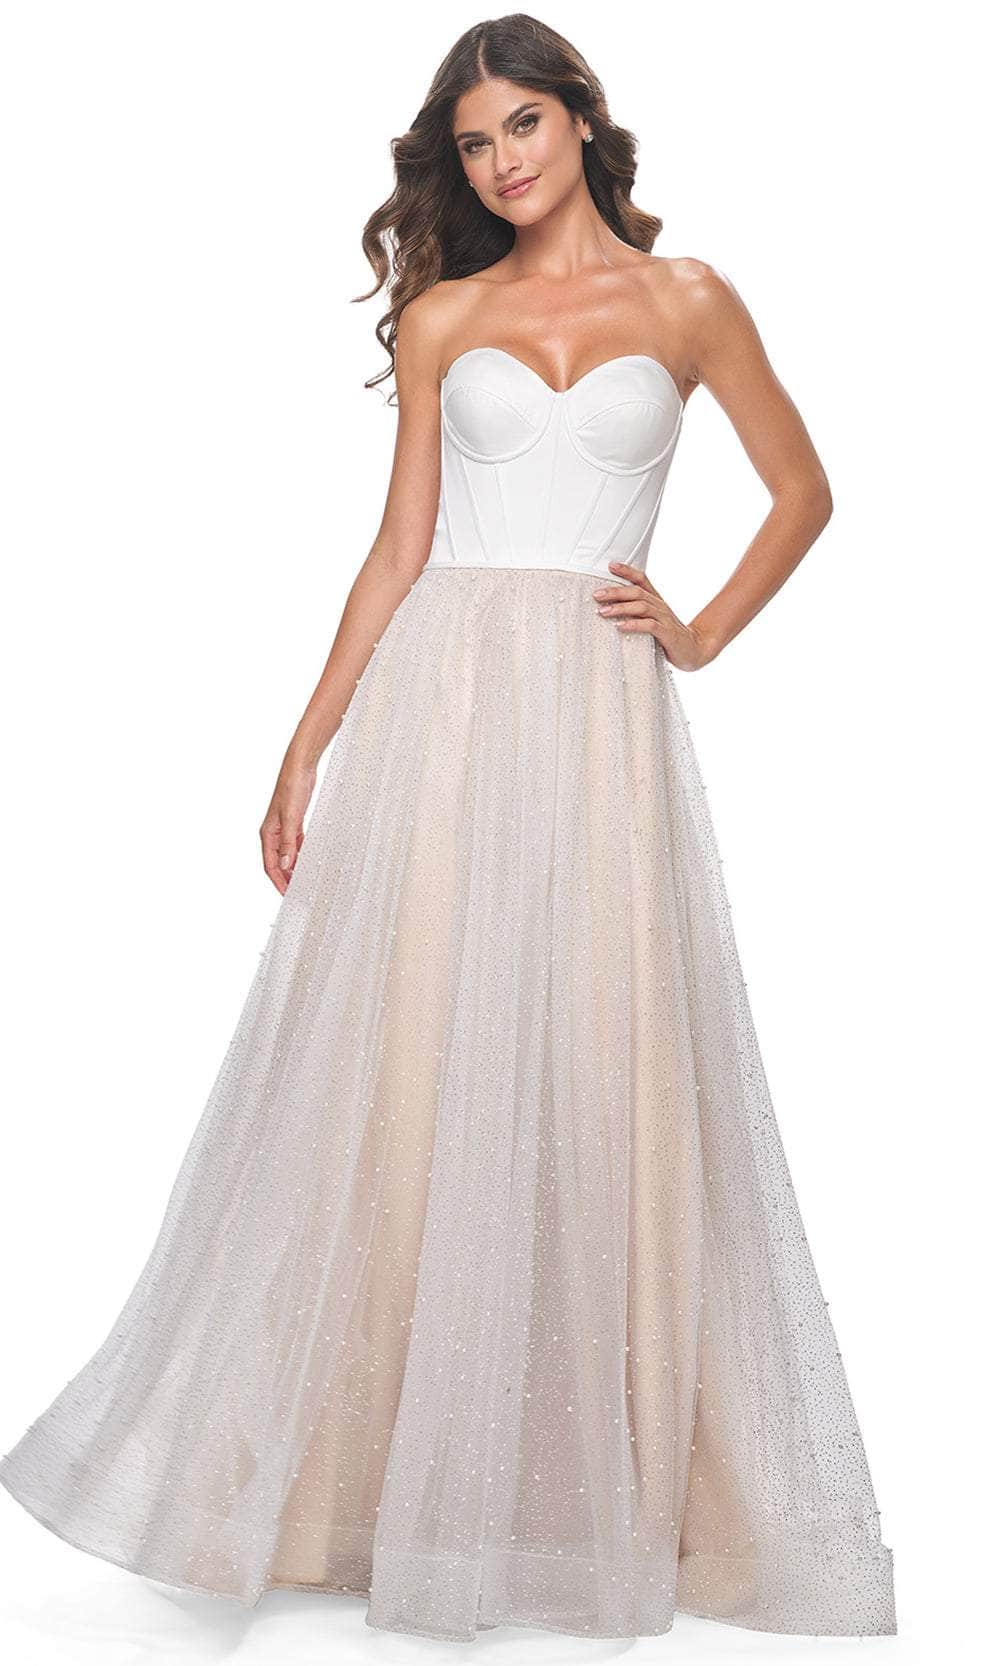 La Femme 32149 - Pearl Accented A-Line Prom Gown Prom Dresses